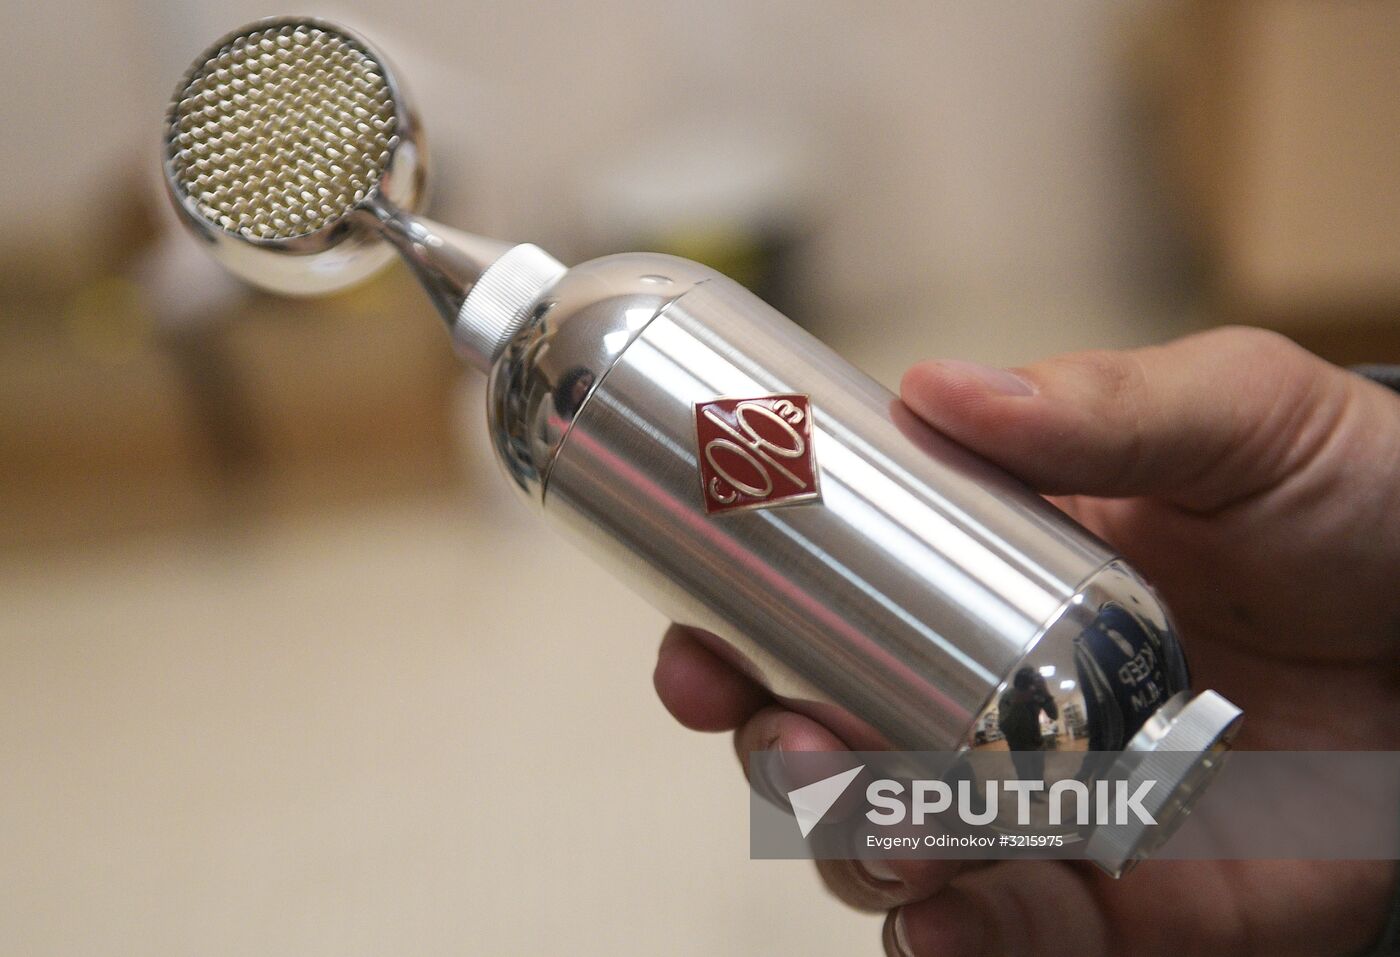 Production of Soyuz microphones in Tula